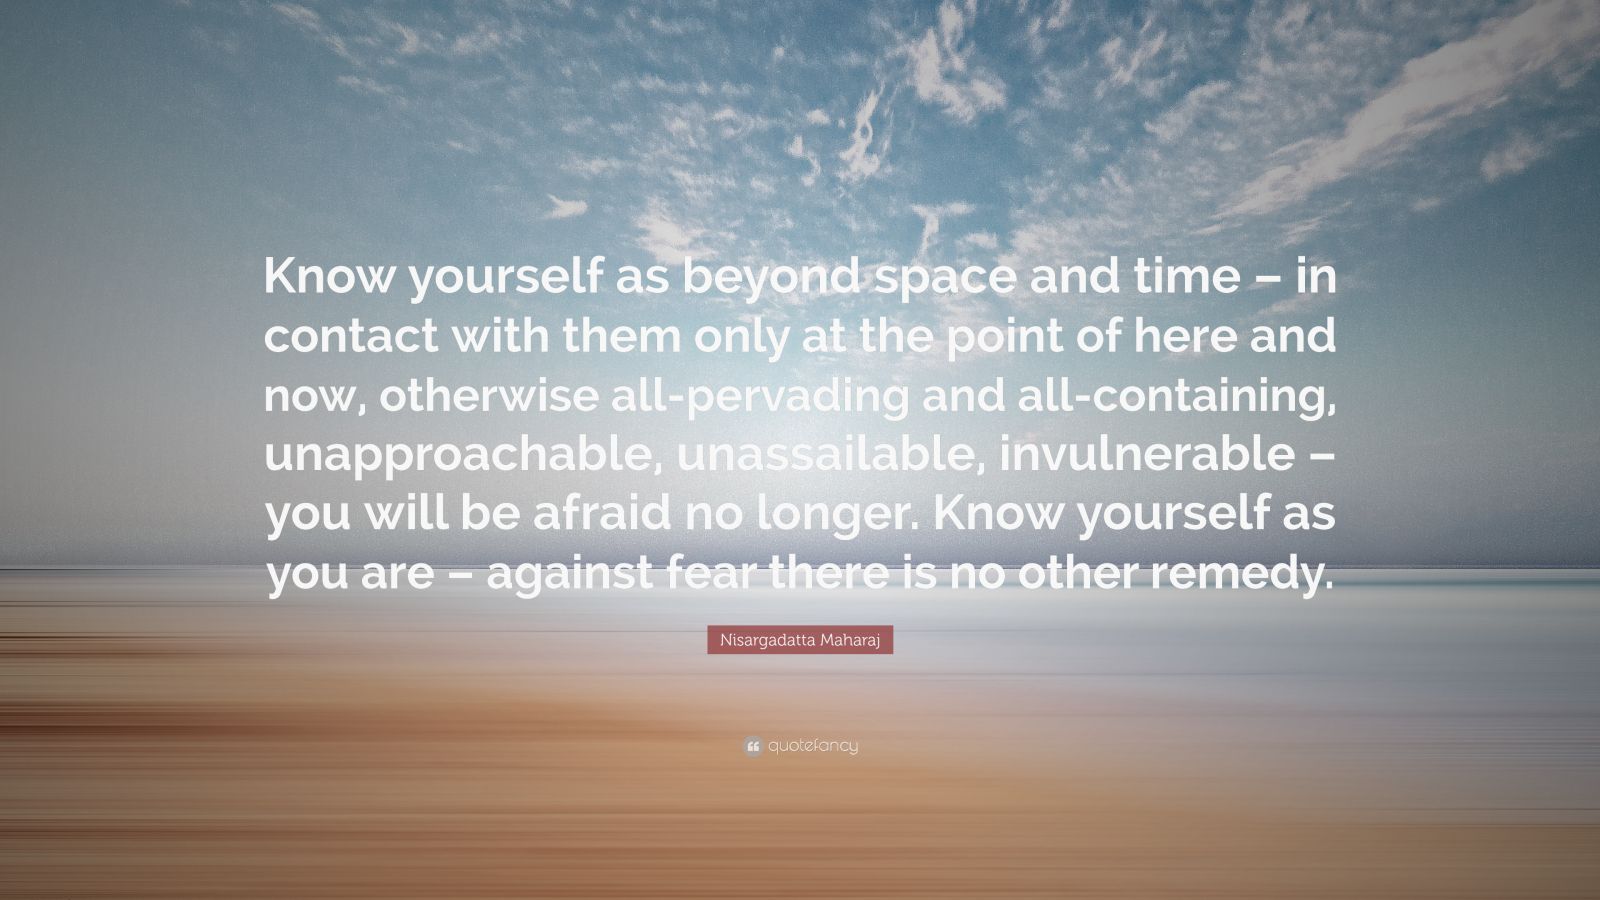 Nisargadatta Maharaj Quote: “Know yourself as beyond space and time ...